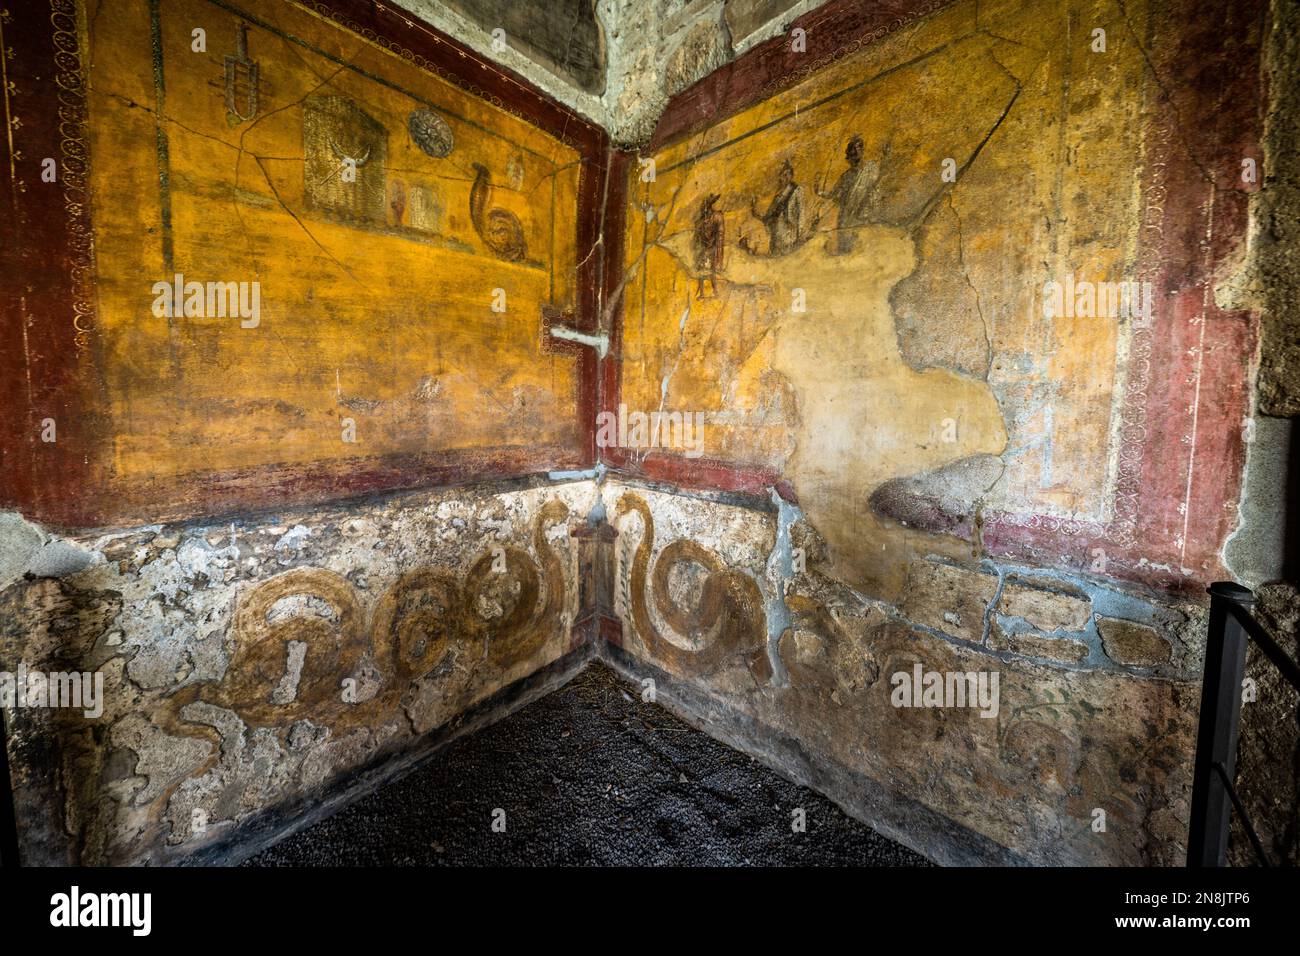 Room of well preserved frescoes in the Casa Degli Amorini in the ruins of Pompeii Stock Photo